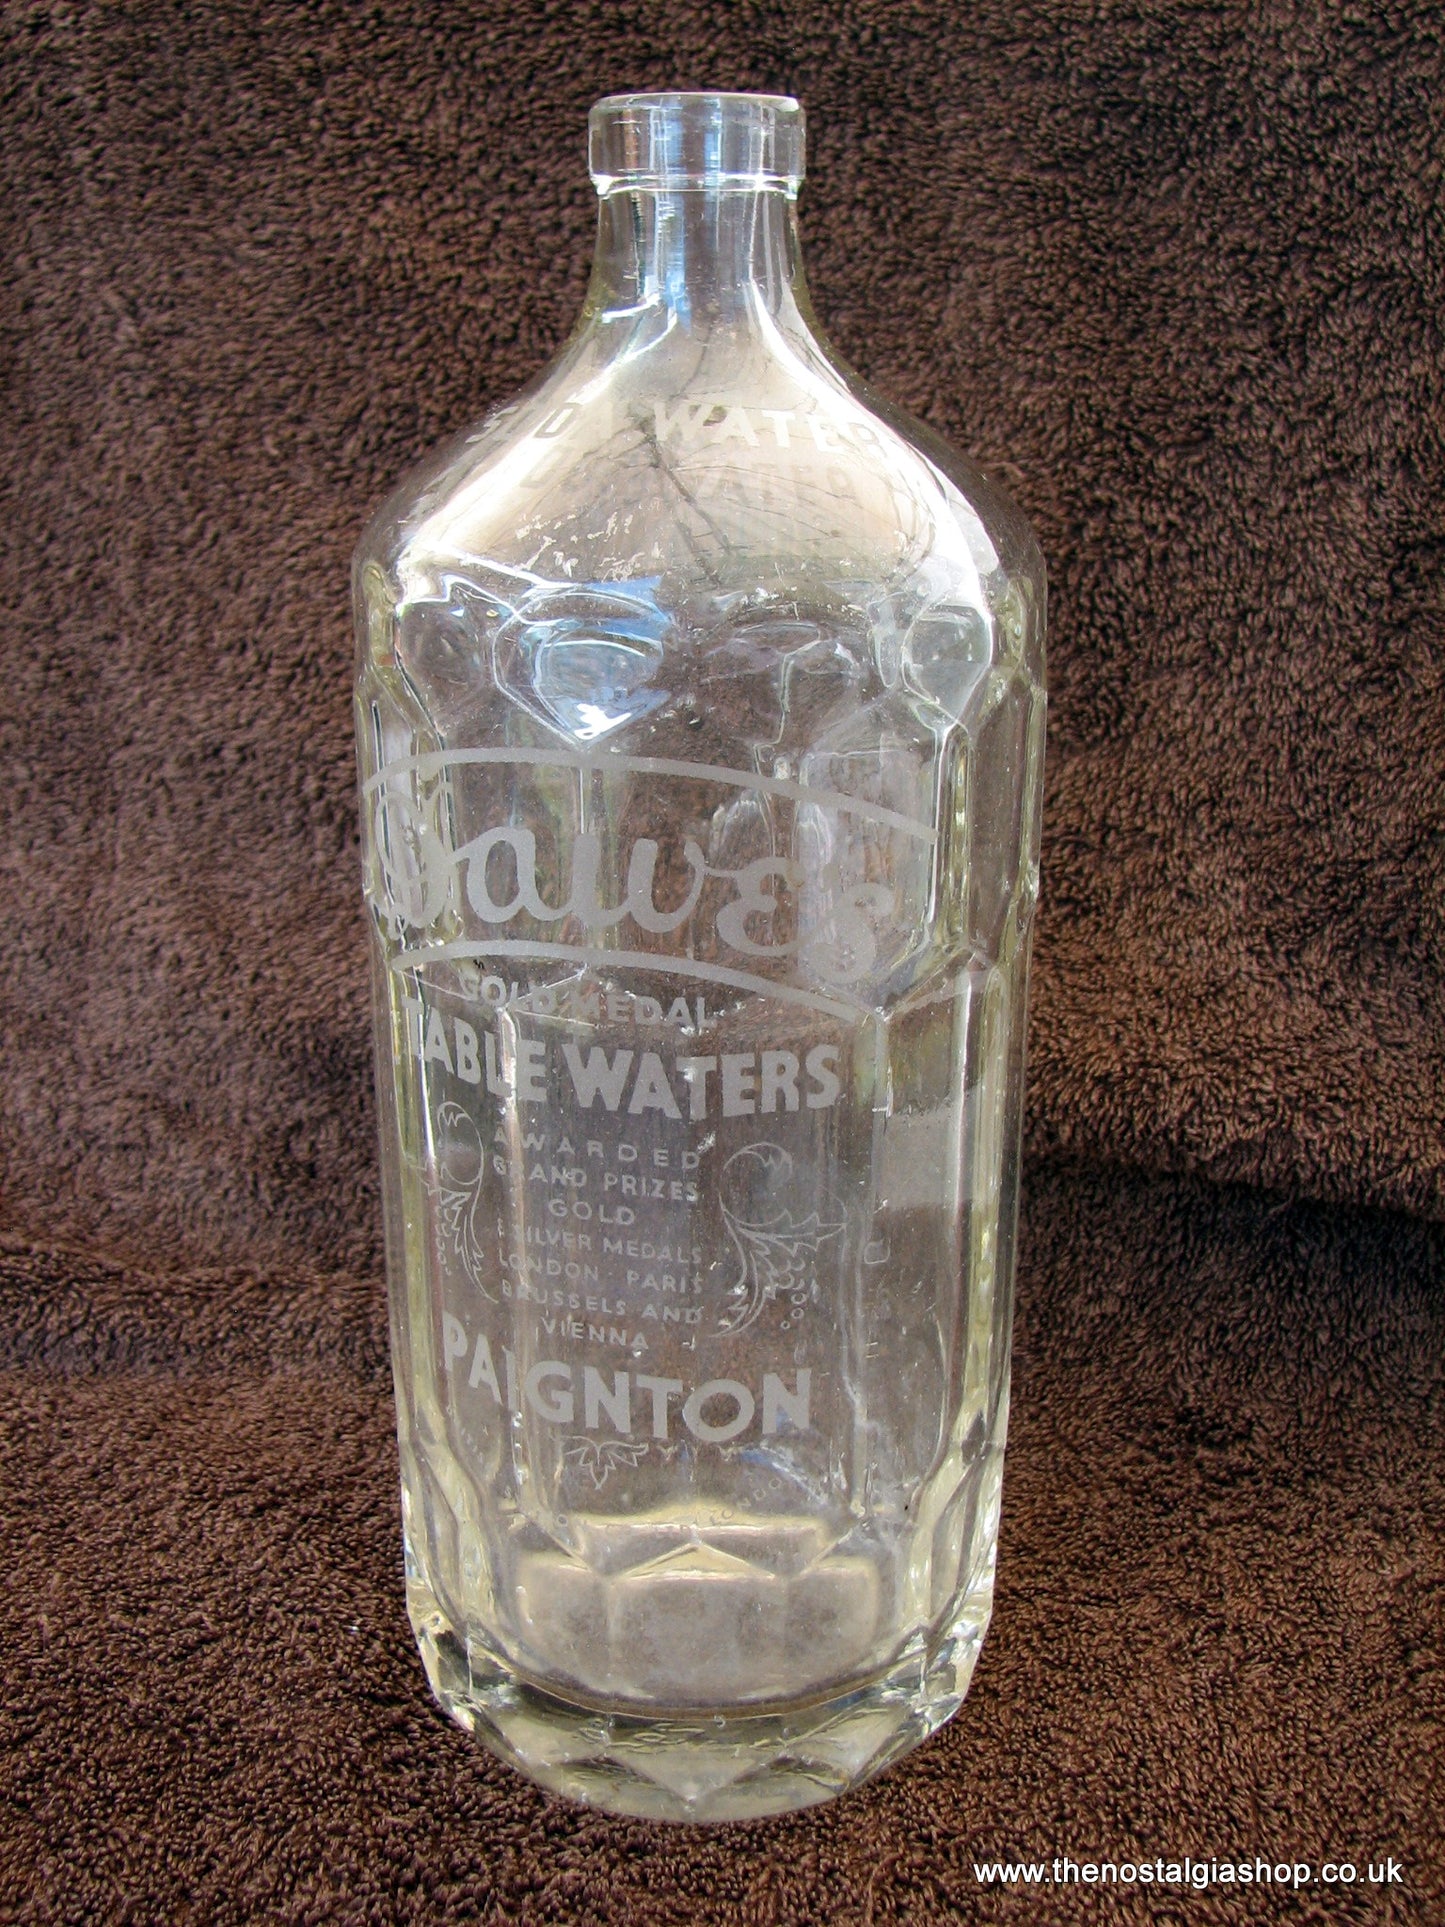 Glass Soda Water Bottle. Dawes Table Waters, Paignton. (ref Nos125)